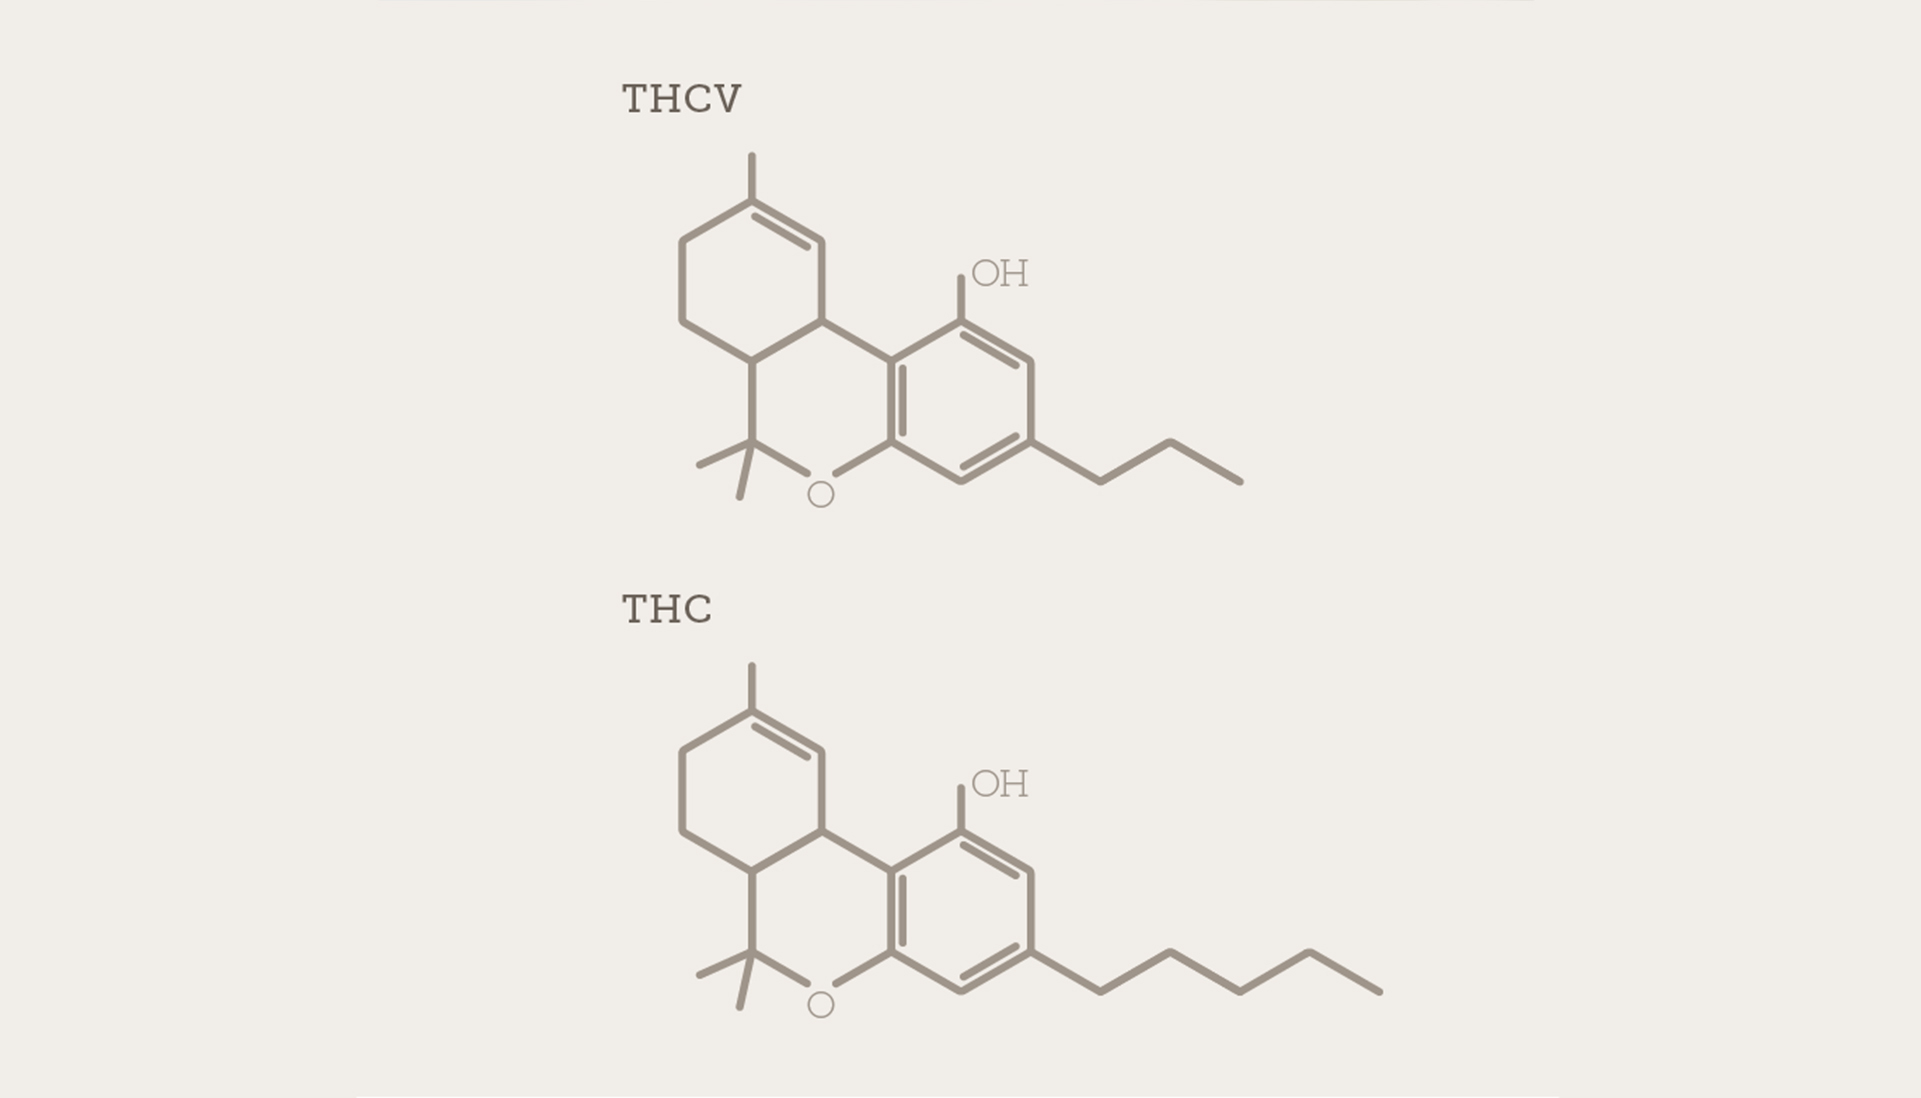 WHERE TO BUY THCV SF - Thcv|Thc|Effects|Cannabinoid|Cannabinoids|Cannabis|Strains|Cbd|Products|Research|Benefits|Receptors|Doses|Studies|Hemp|Marijuana|Cb1|Body|Tetrahydrocannabivarin|Plant|Study|People|System|Drug|Receptor|Plants|Users|Properties|Diabetes|Disease|Side|Product|Compound|Appetite|Effect|Levels|Cb2|Brain|Cbg|States|Psychoactive Effects|Cb2 Receptors|Weight Loss|Thcv Products|Low Doses|Cb1 Receptors|Endocannabinoid System|United States|High Doses|Potential Benefits|Cannabis Plants|Cb1 Receptor|Cannabinoid Receptors|Molecular Structure|Psychoactive Properties|Large Doses|Nervous System|Cannabis Plant|Cannabis Strains|Thcv Effects|Durban Poison|Farm Bill|Drug Test|View Abstract|Animal Studies|Immune System|Hemp Plants|Small Doses|High Thcv Strains|Marijuana Strains